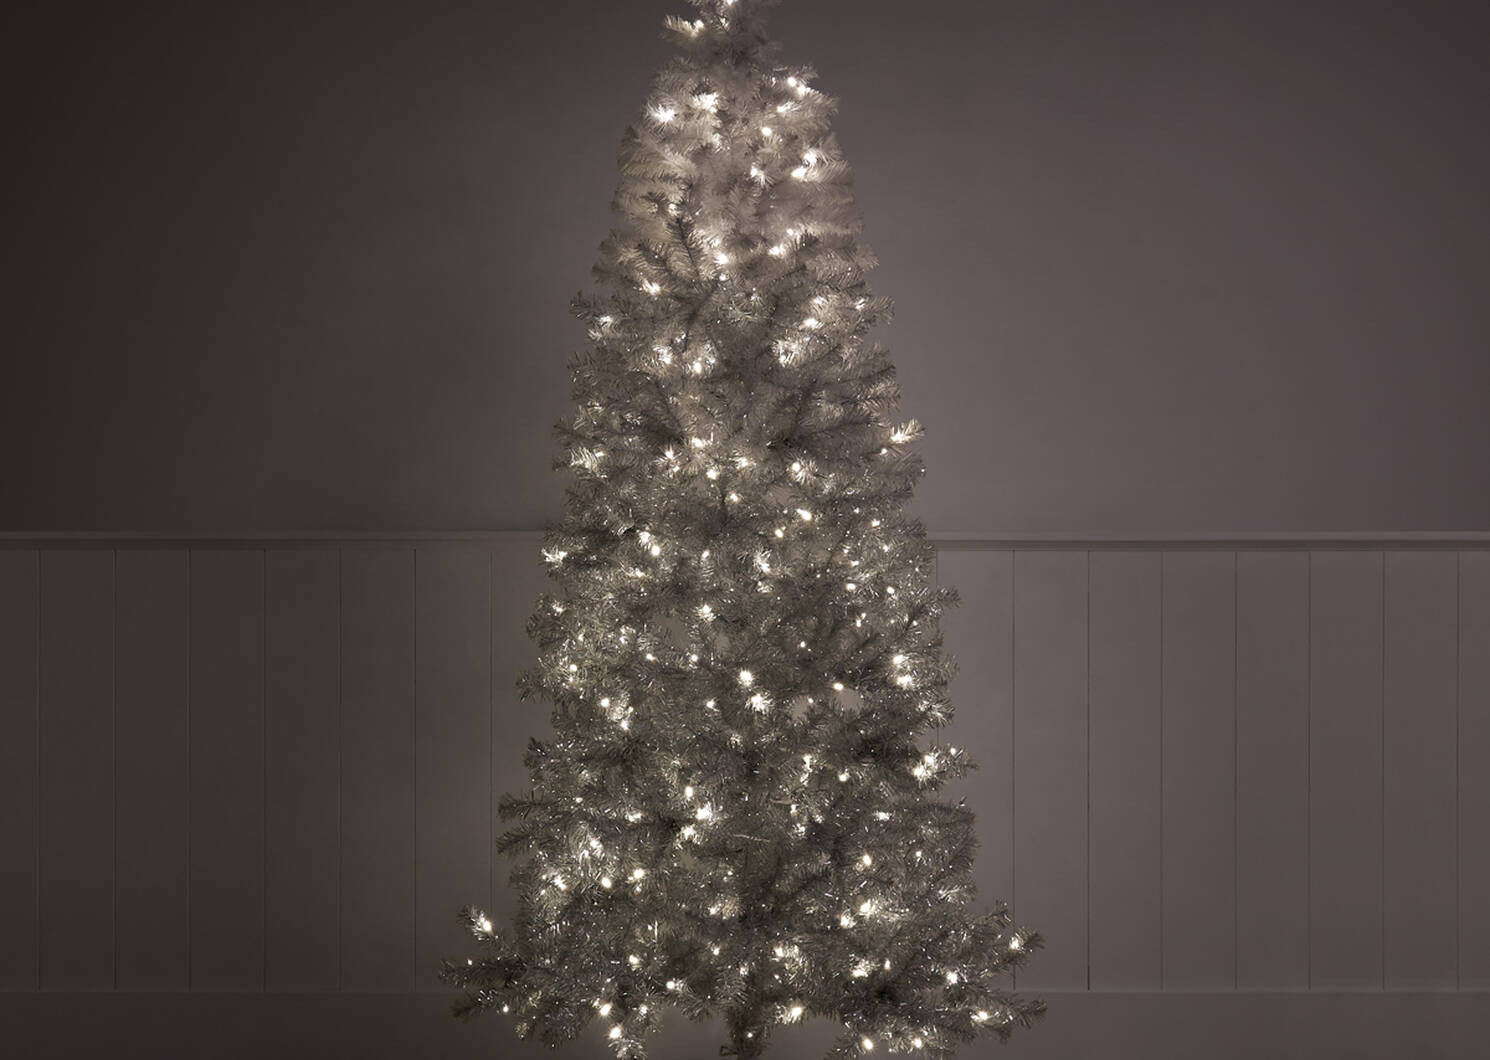 Claus Tree 7ft Pre-lit LED Ombre Grey